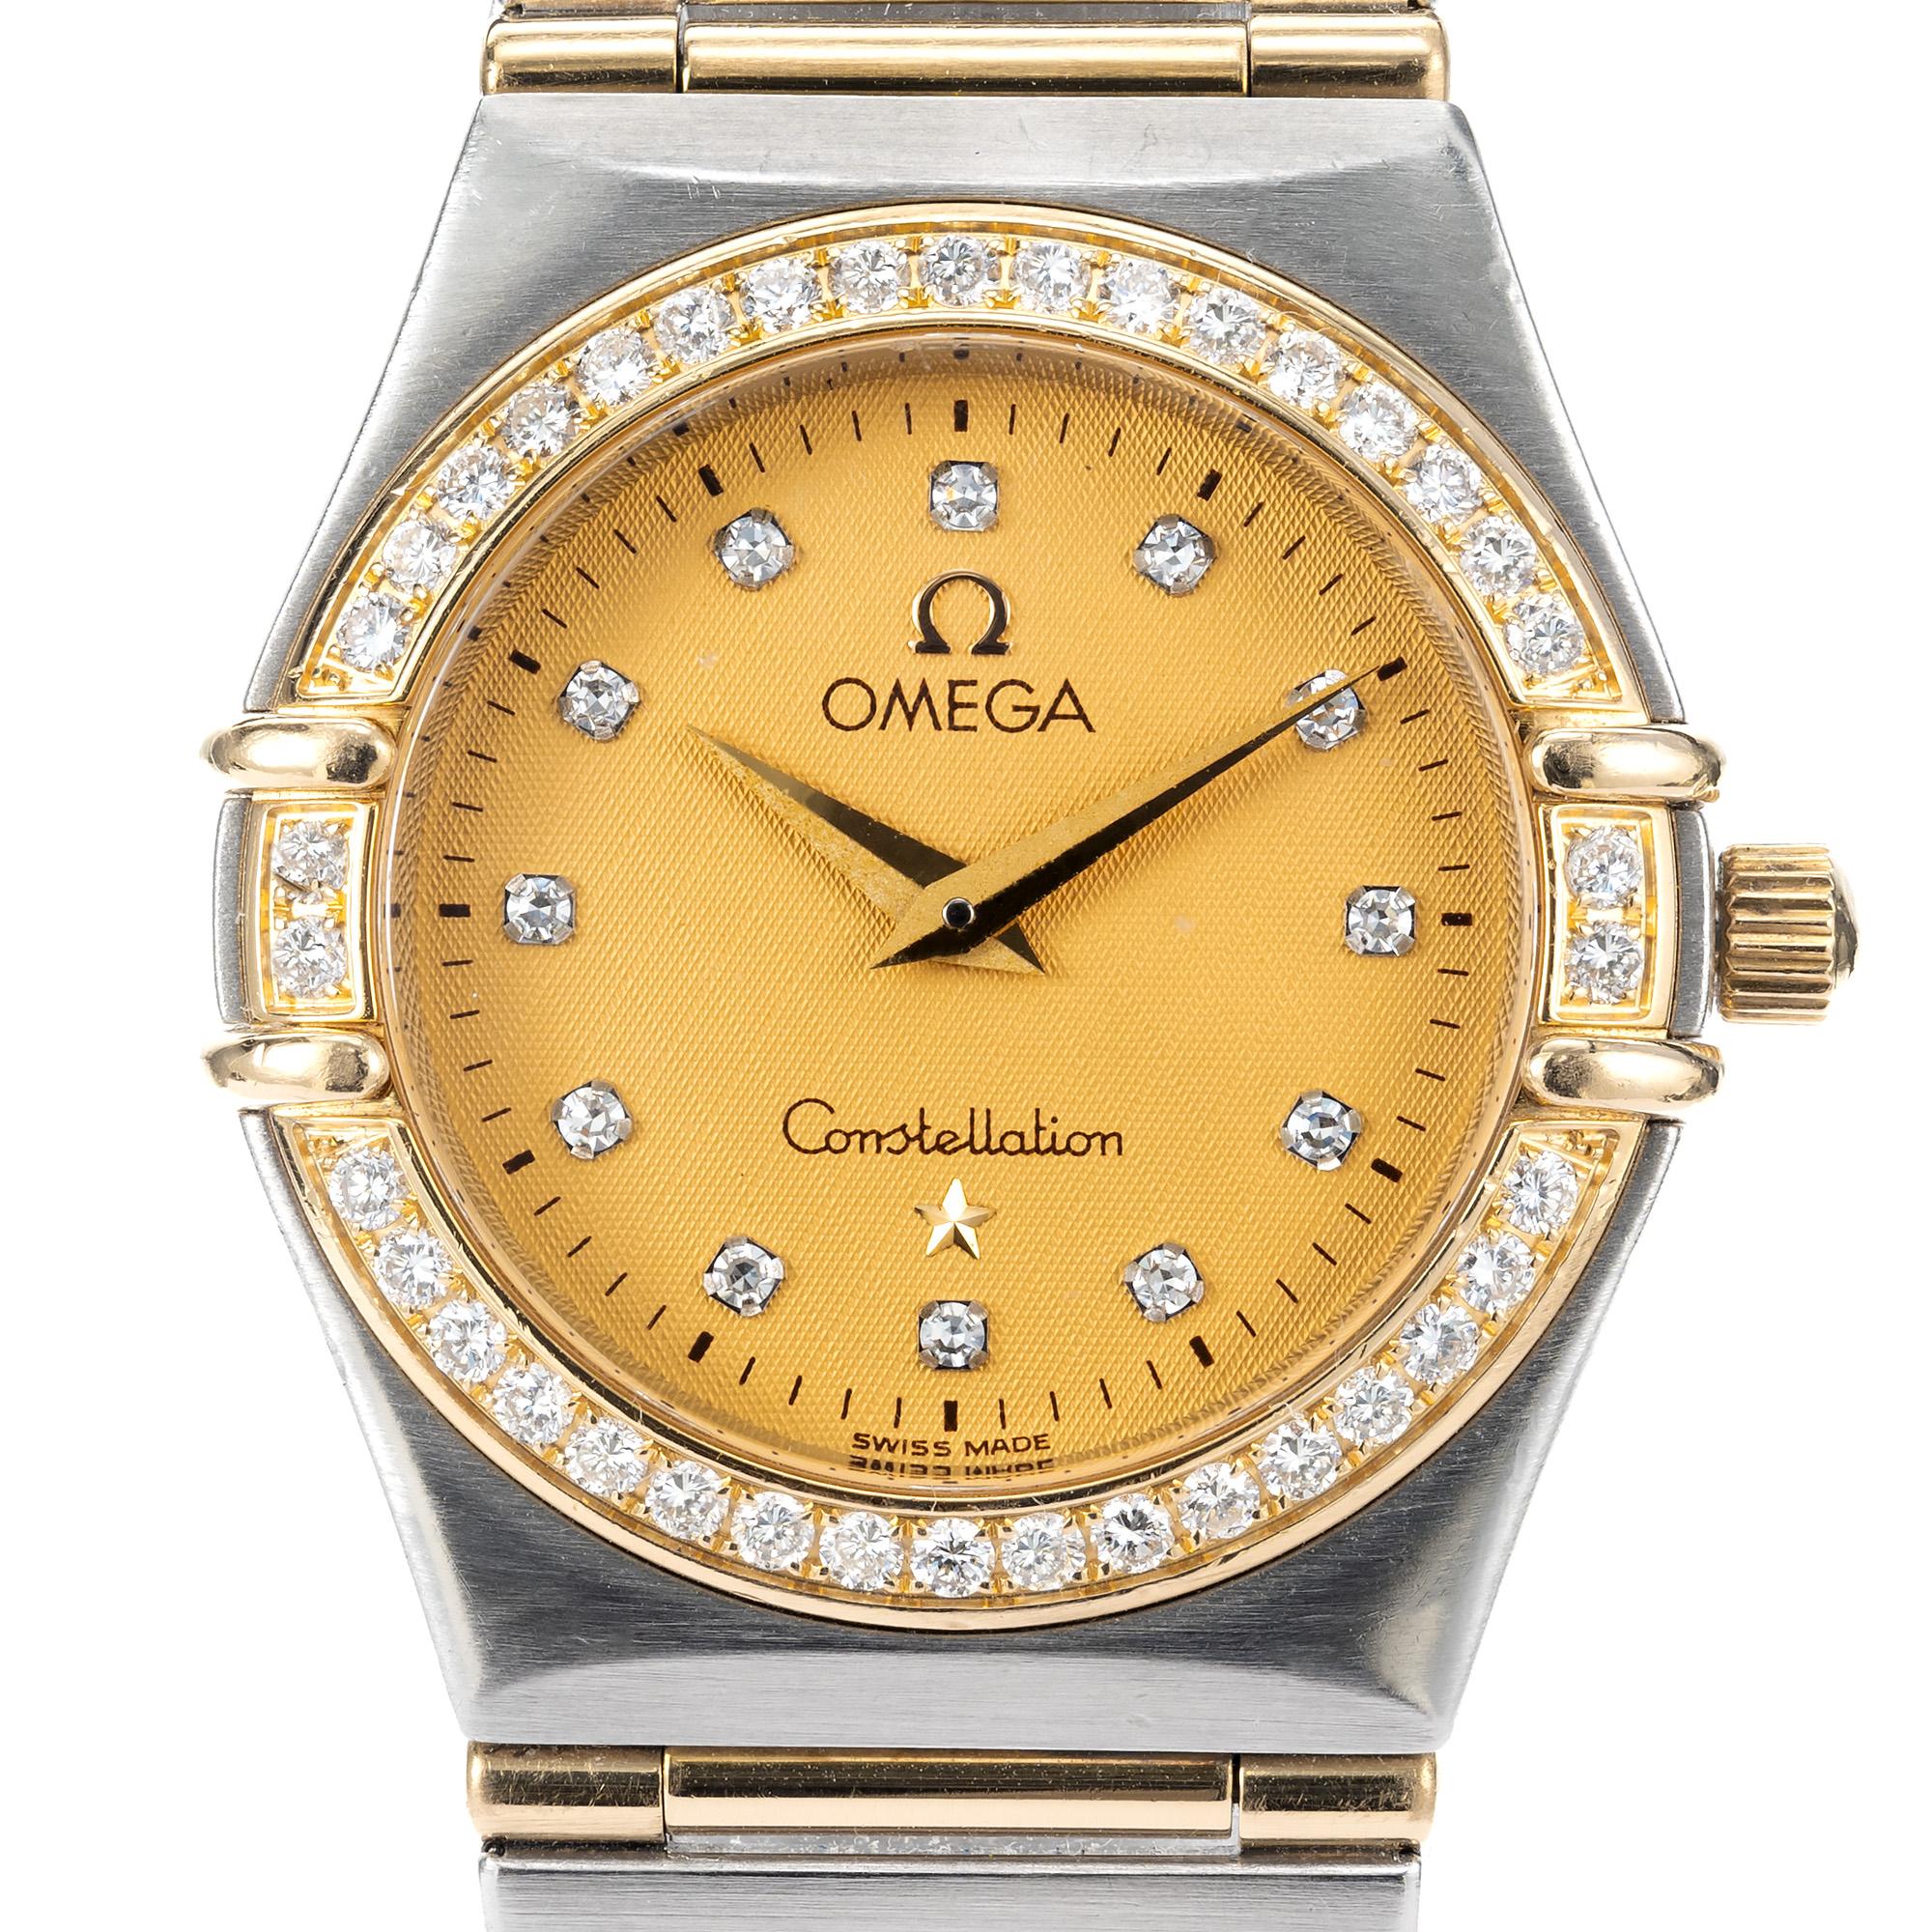 Ladies steel and 18k yellow gold Omega full bar  wristwatch. This watch features a, 12 round diamond dial accented by 36 diamond diamond bezel. 

36 round cut bezel set diamonds
12 round diamonds 
Length: 28mm
Width: 25mm
Band width at case: